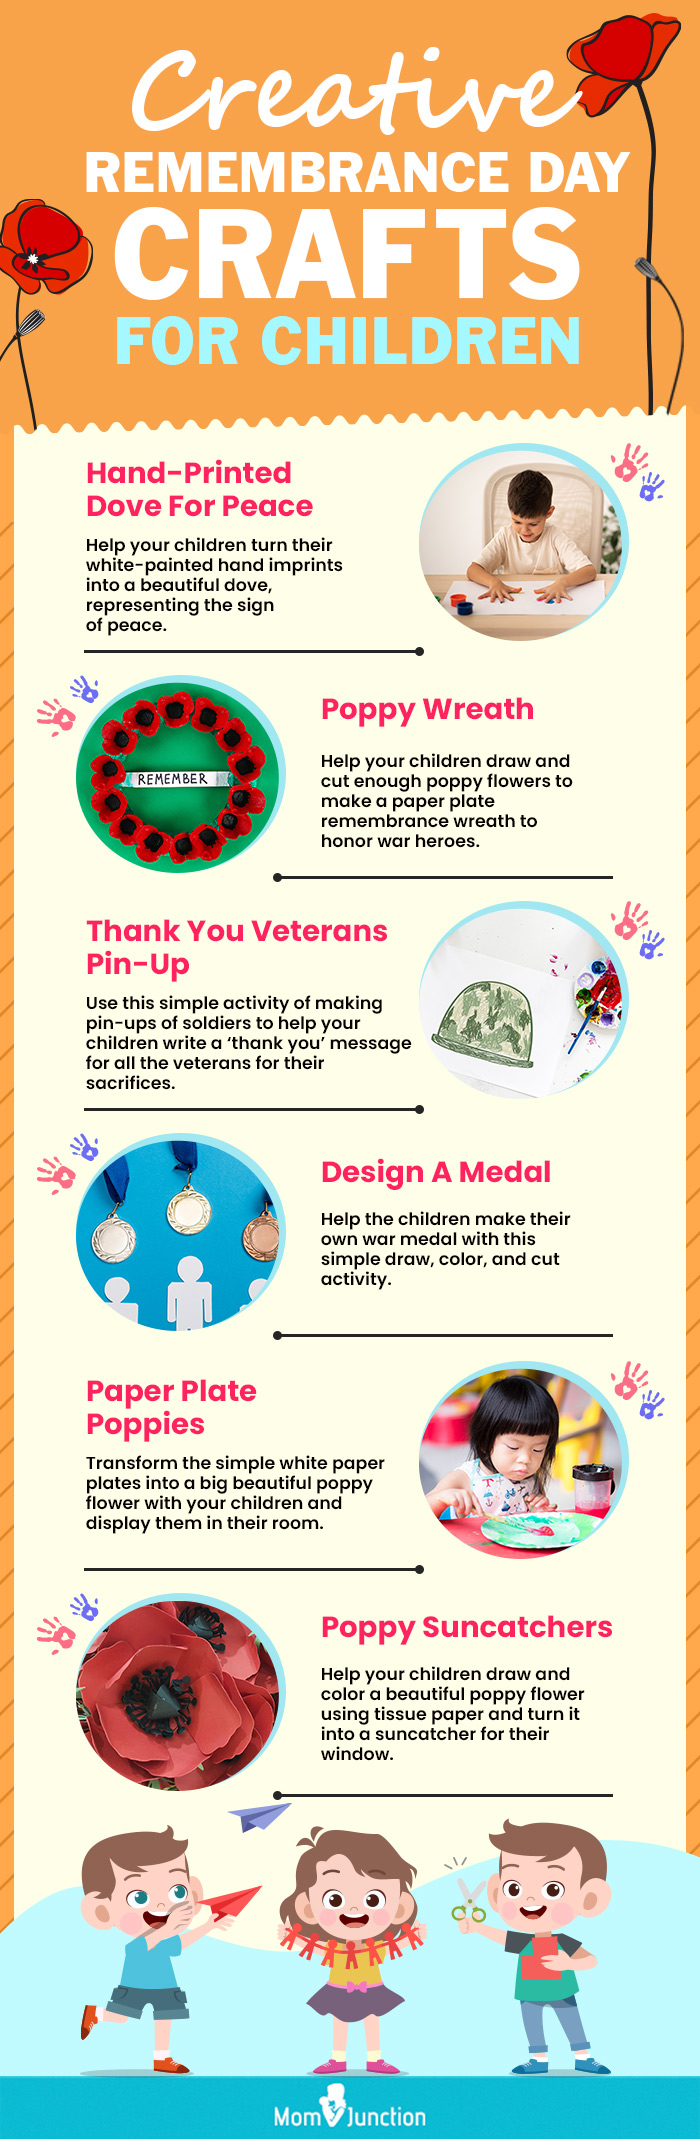 creative remembrance day crafts for children (infographic)